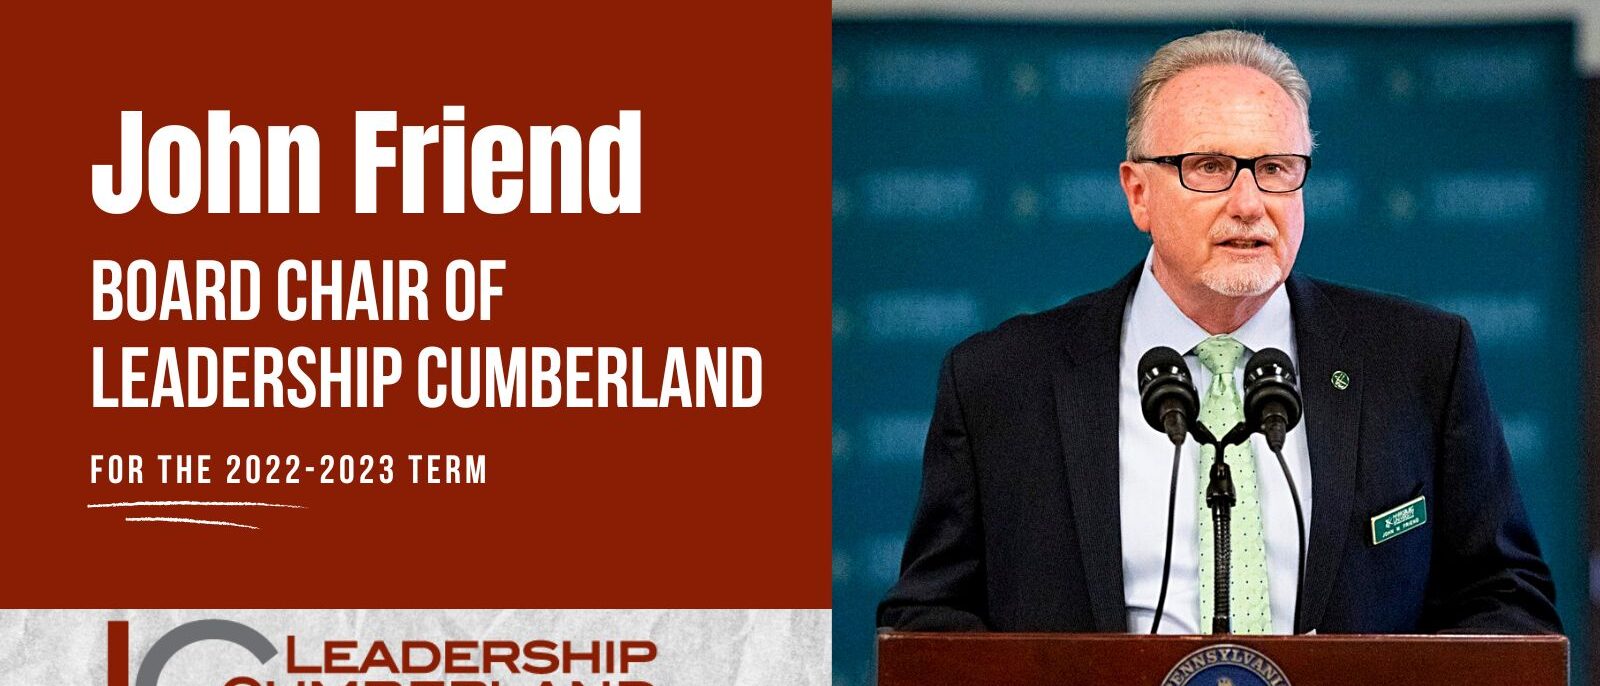 <strong>HU leader named board chair of Leadership Cumberland</strong>